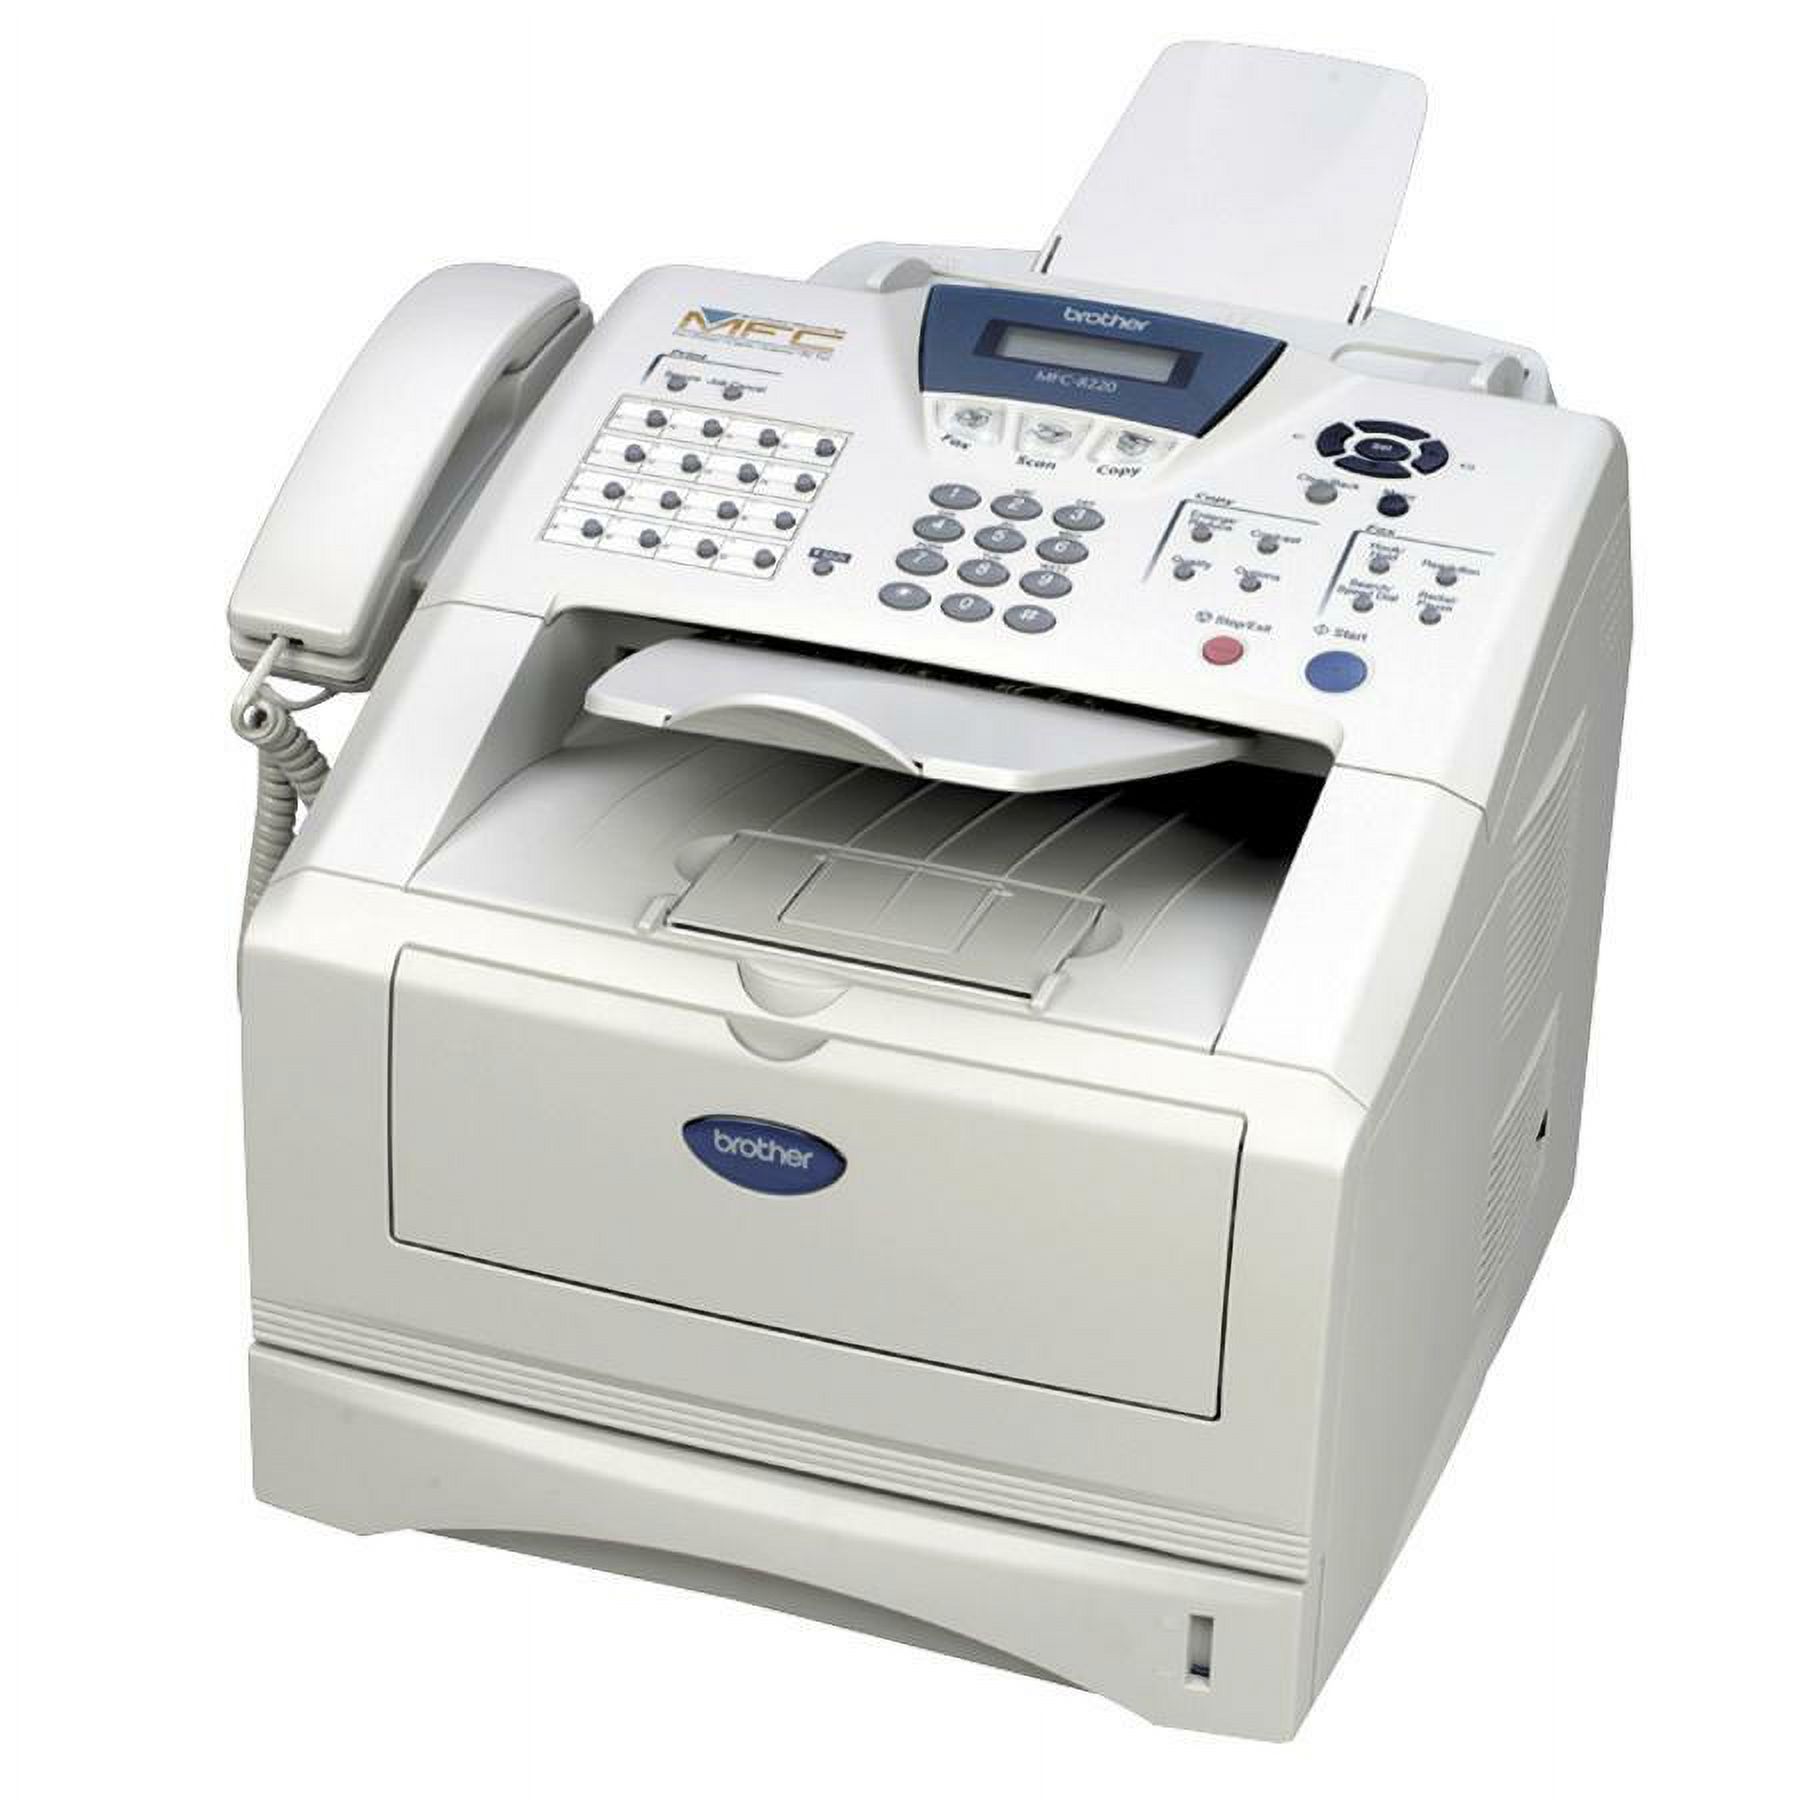 Brother MFC-8300 Multifunction Printer - image 2 of 2